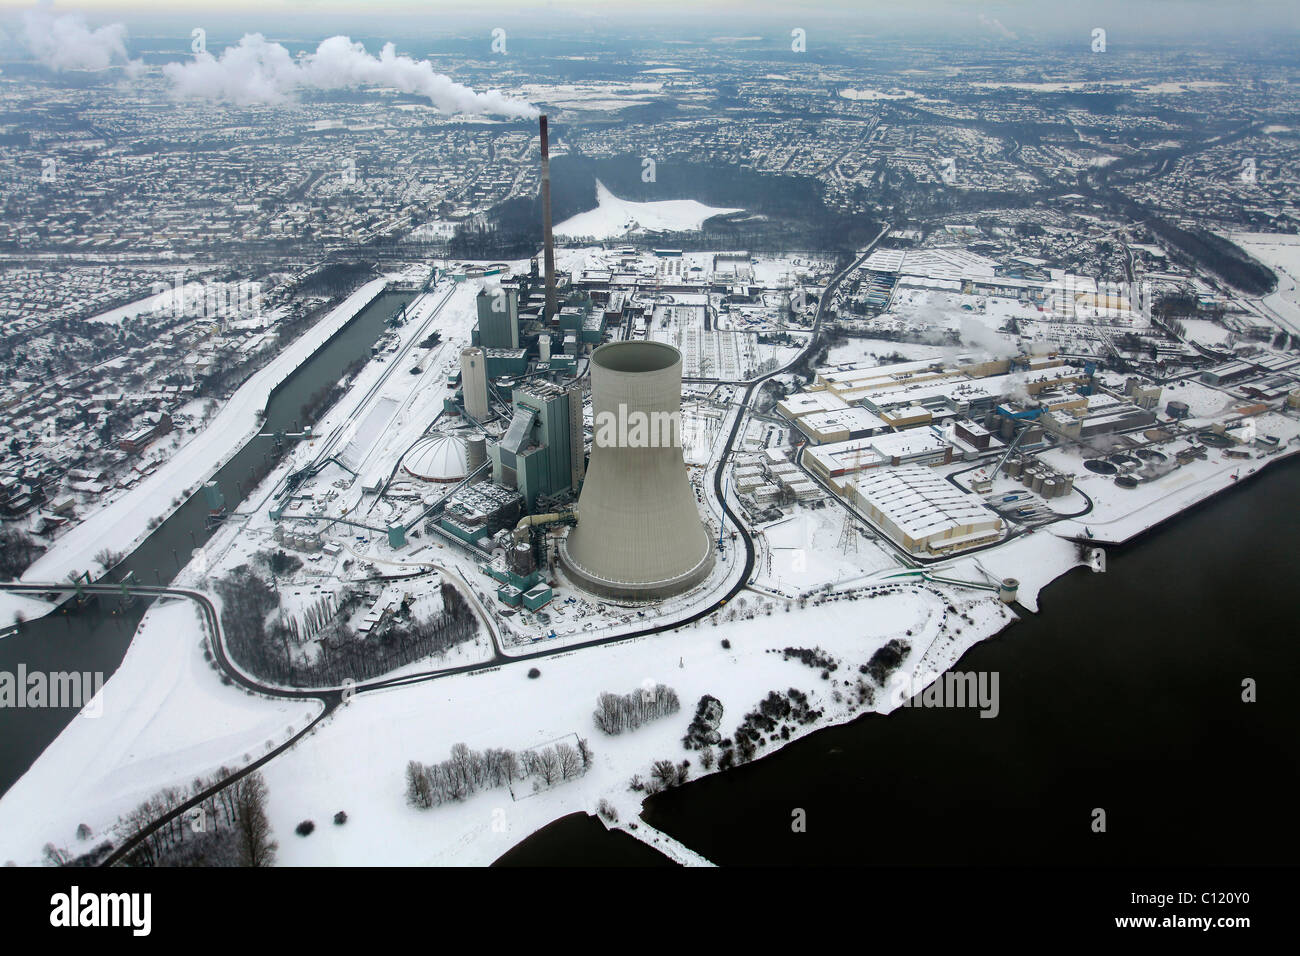 Aerial photo, cooling tower, construction site, Walsum Steal EVONIK STEAG coal power station, Snow, Duisburg, Rhein Stock Photo